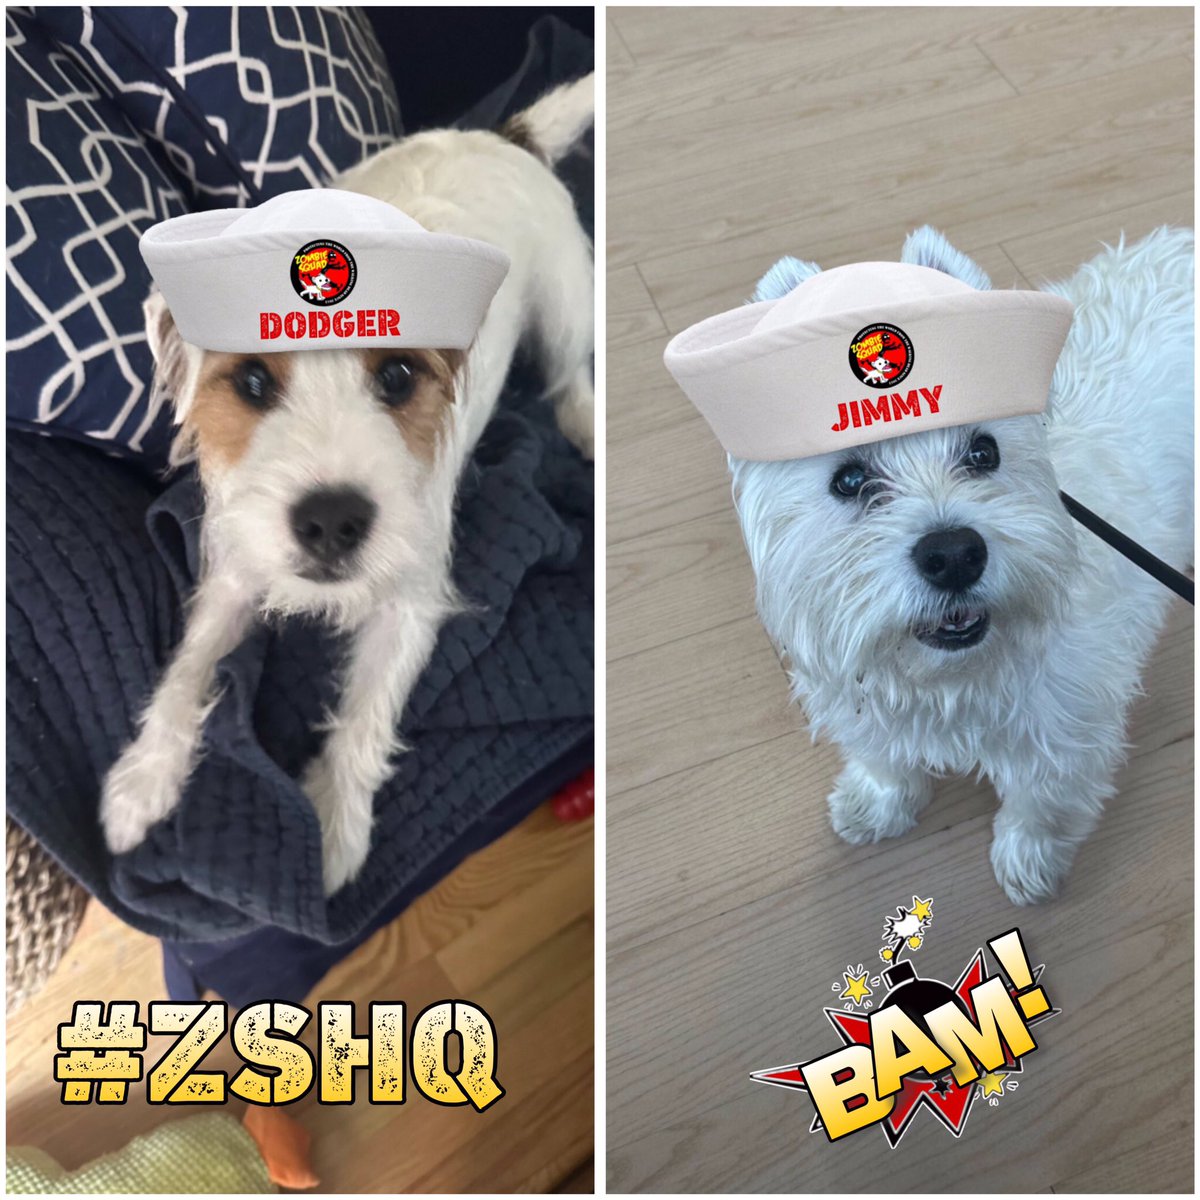 08:00 Hours. “Workmen” on the way to our house. We aren’t so sure. Zombs come in many disguises. We are set up to watch EVERY move to make sure none of them “turn”. More later. Stay safe troops! Cpls. Jimmy & Dodger, ever alert! Raaaaaa! #ZSHQ